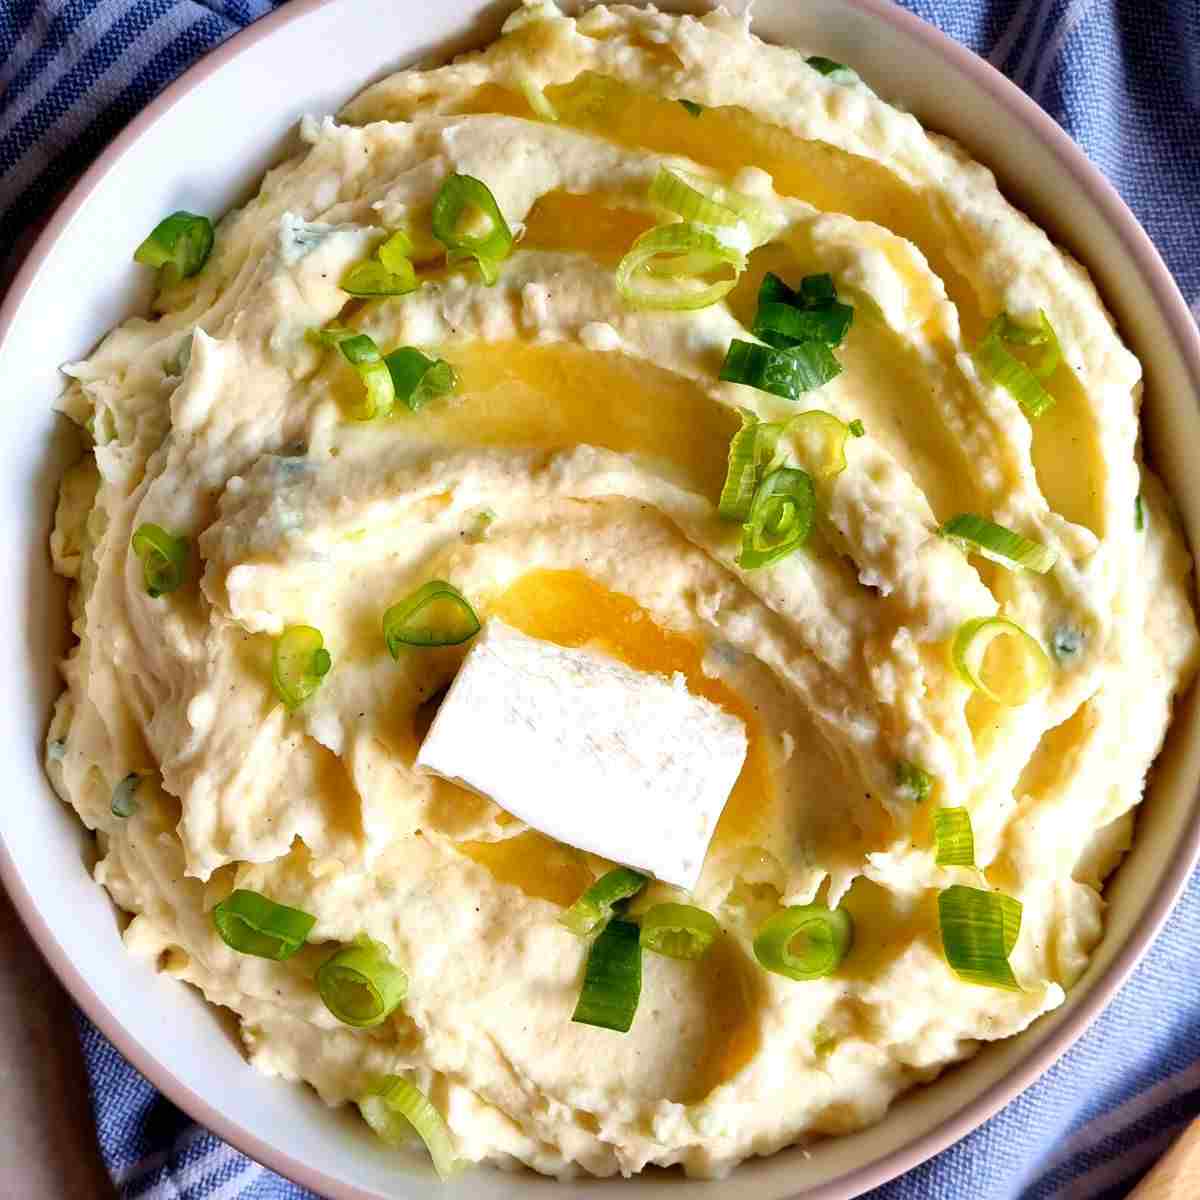 Creamy Mashed potatoes with sour cream.